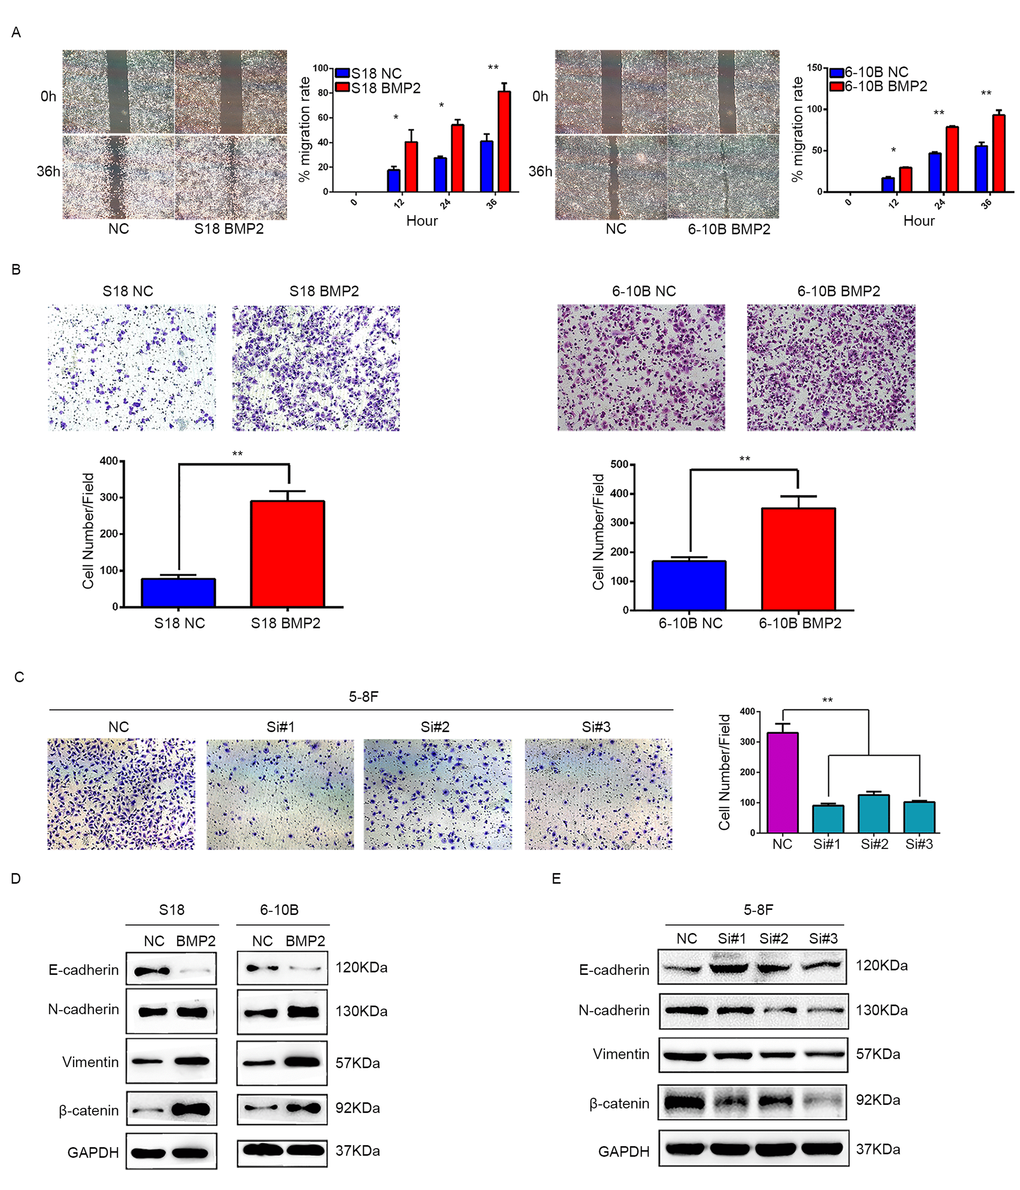 BMP2 promotes NPC cell migration, invasion and epithelial-mesenchymal transition. (A) Wound-healing assays demonstrated that BMP2 upregulated cells had higher migration rate than control cells. (B) Matrigel invasion chambers were used to evaluate the ability of NPC cell invasion. Upregulation of BMP2 significantly increased the number of invaded cell in S18 and 6-10B compared with the controls. (C) silencing expression of BMP2 in 5-8F much reduced the invaded cell numbers. (D) Western blotting revealed that overexpression of BMP2 in S18 and 6-10B cells decreased the expression of epithelial makers (E-cadherin) and increased the expression of mesenchymal markers (N-cadherin, Vimentin and β-catenin) in comparison with the controls. (E) Western blotting showed that knockdown of BMP2 increased the expression of E-cadherin and decreased the expression of N-cadherin, Vimentin and β-catenin.